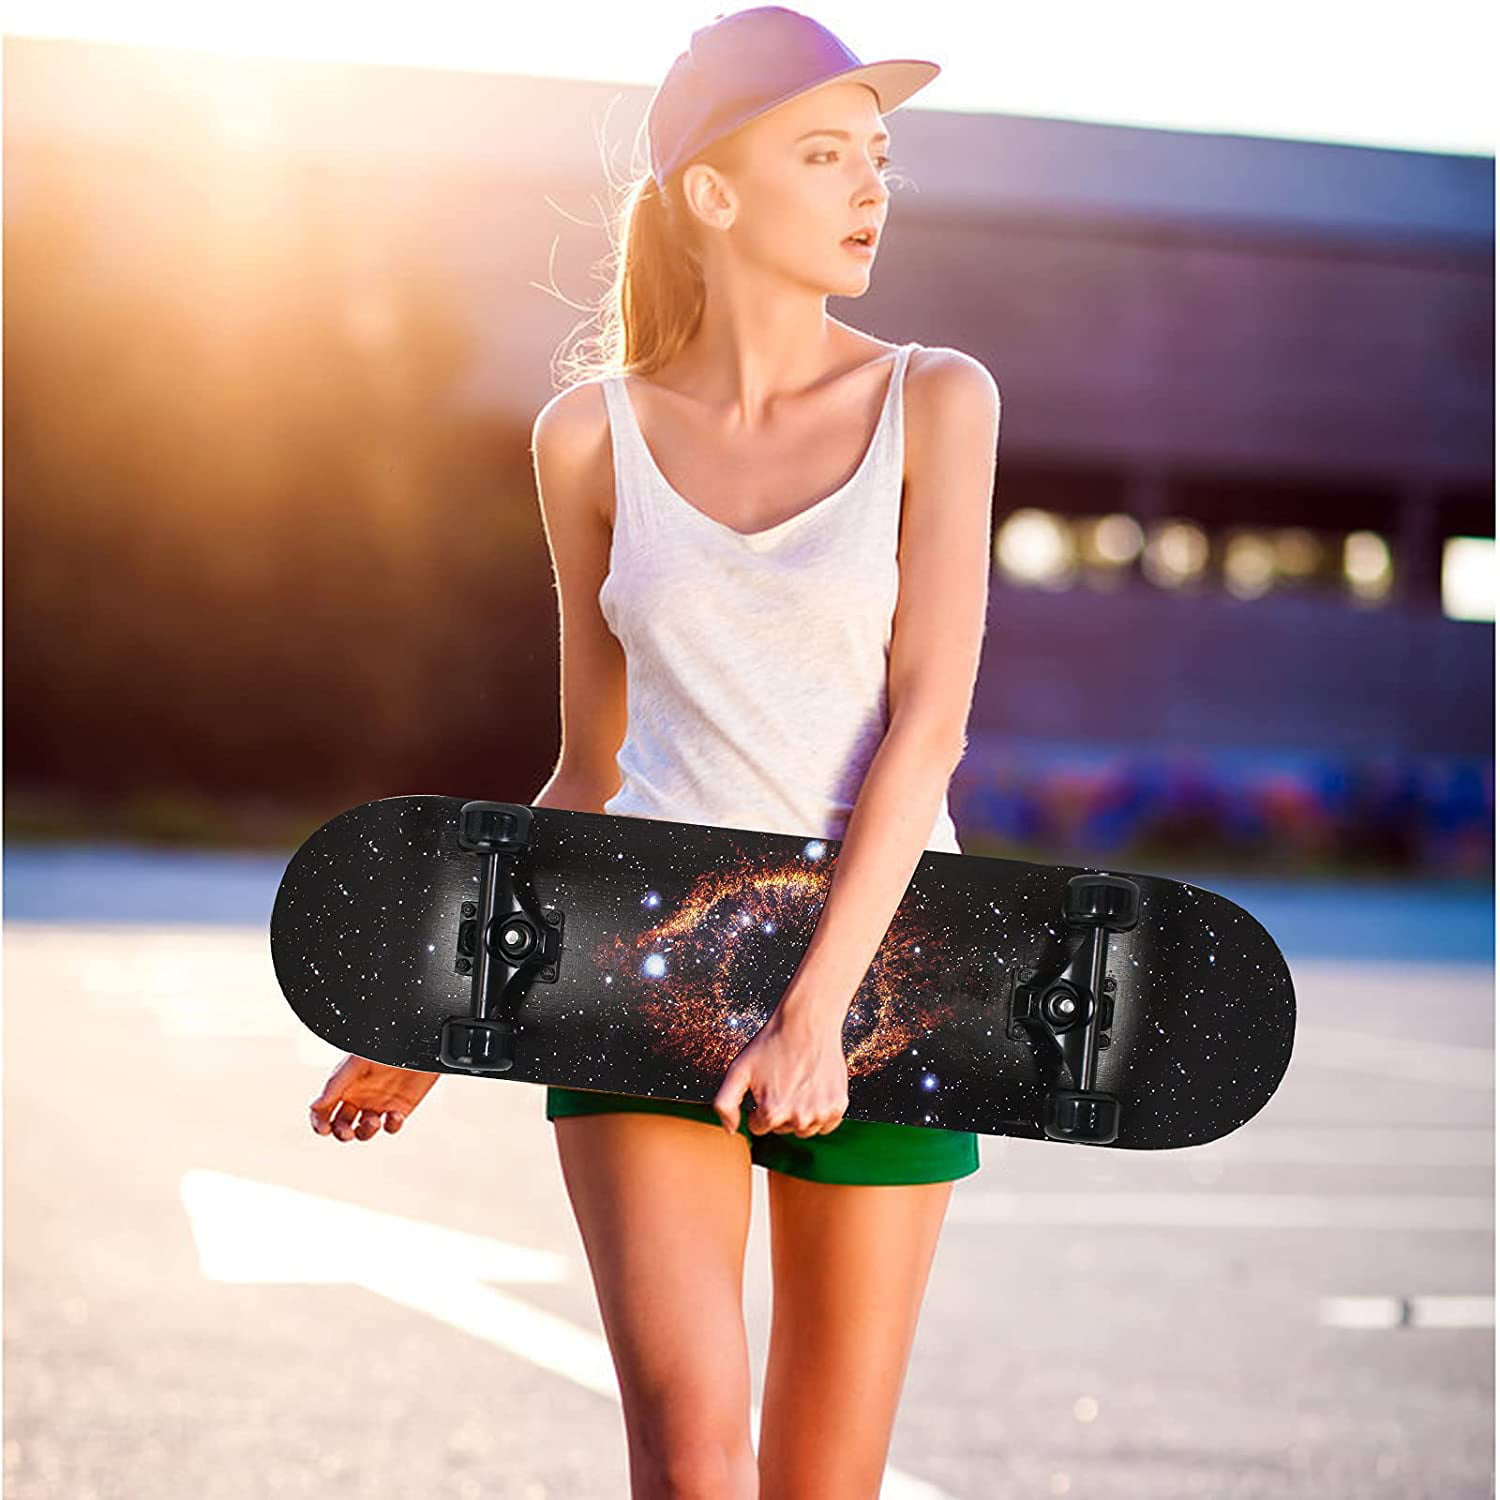 Pwigs Pro Complete Skateboards for Beginners Adults Youths Teens Girls Boys 31x8 Skate Boards 7 Layers Deck Maple Wood Longboards